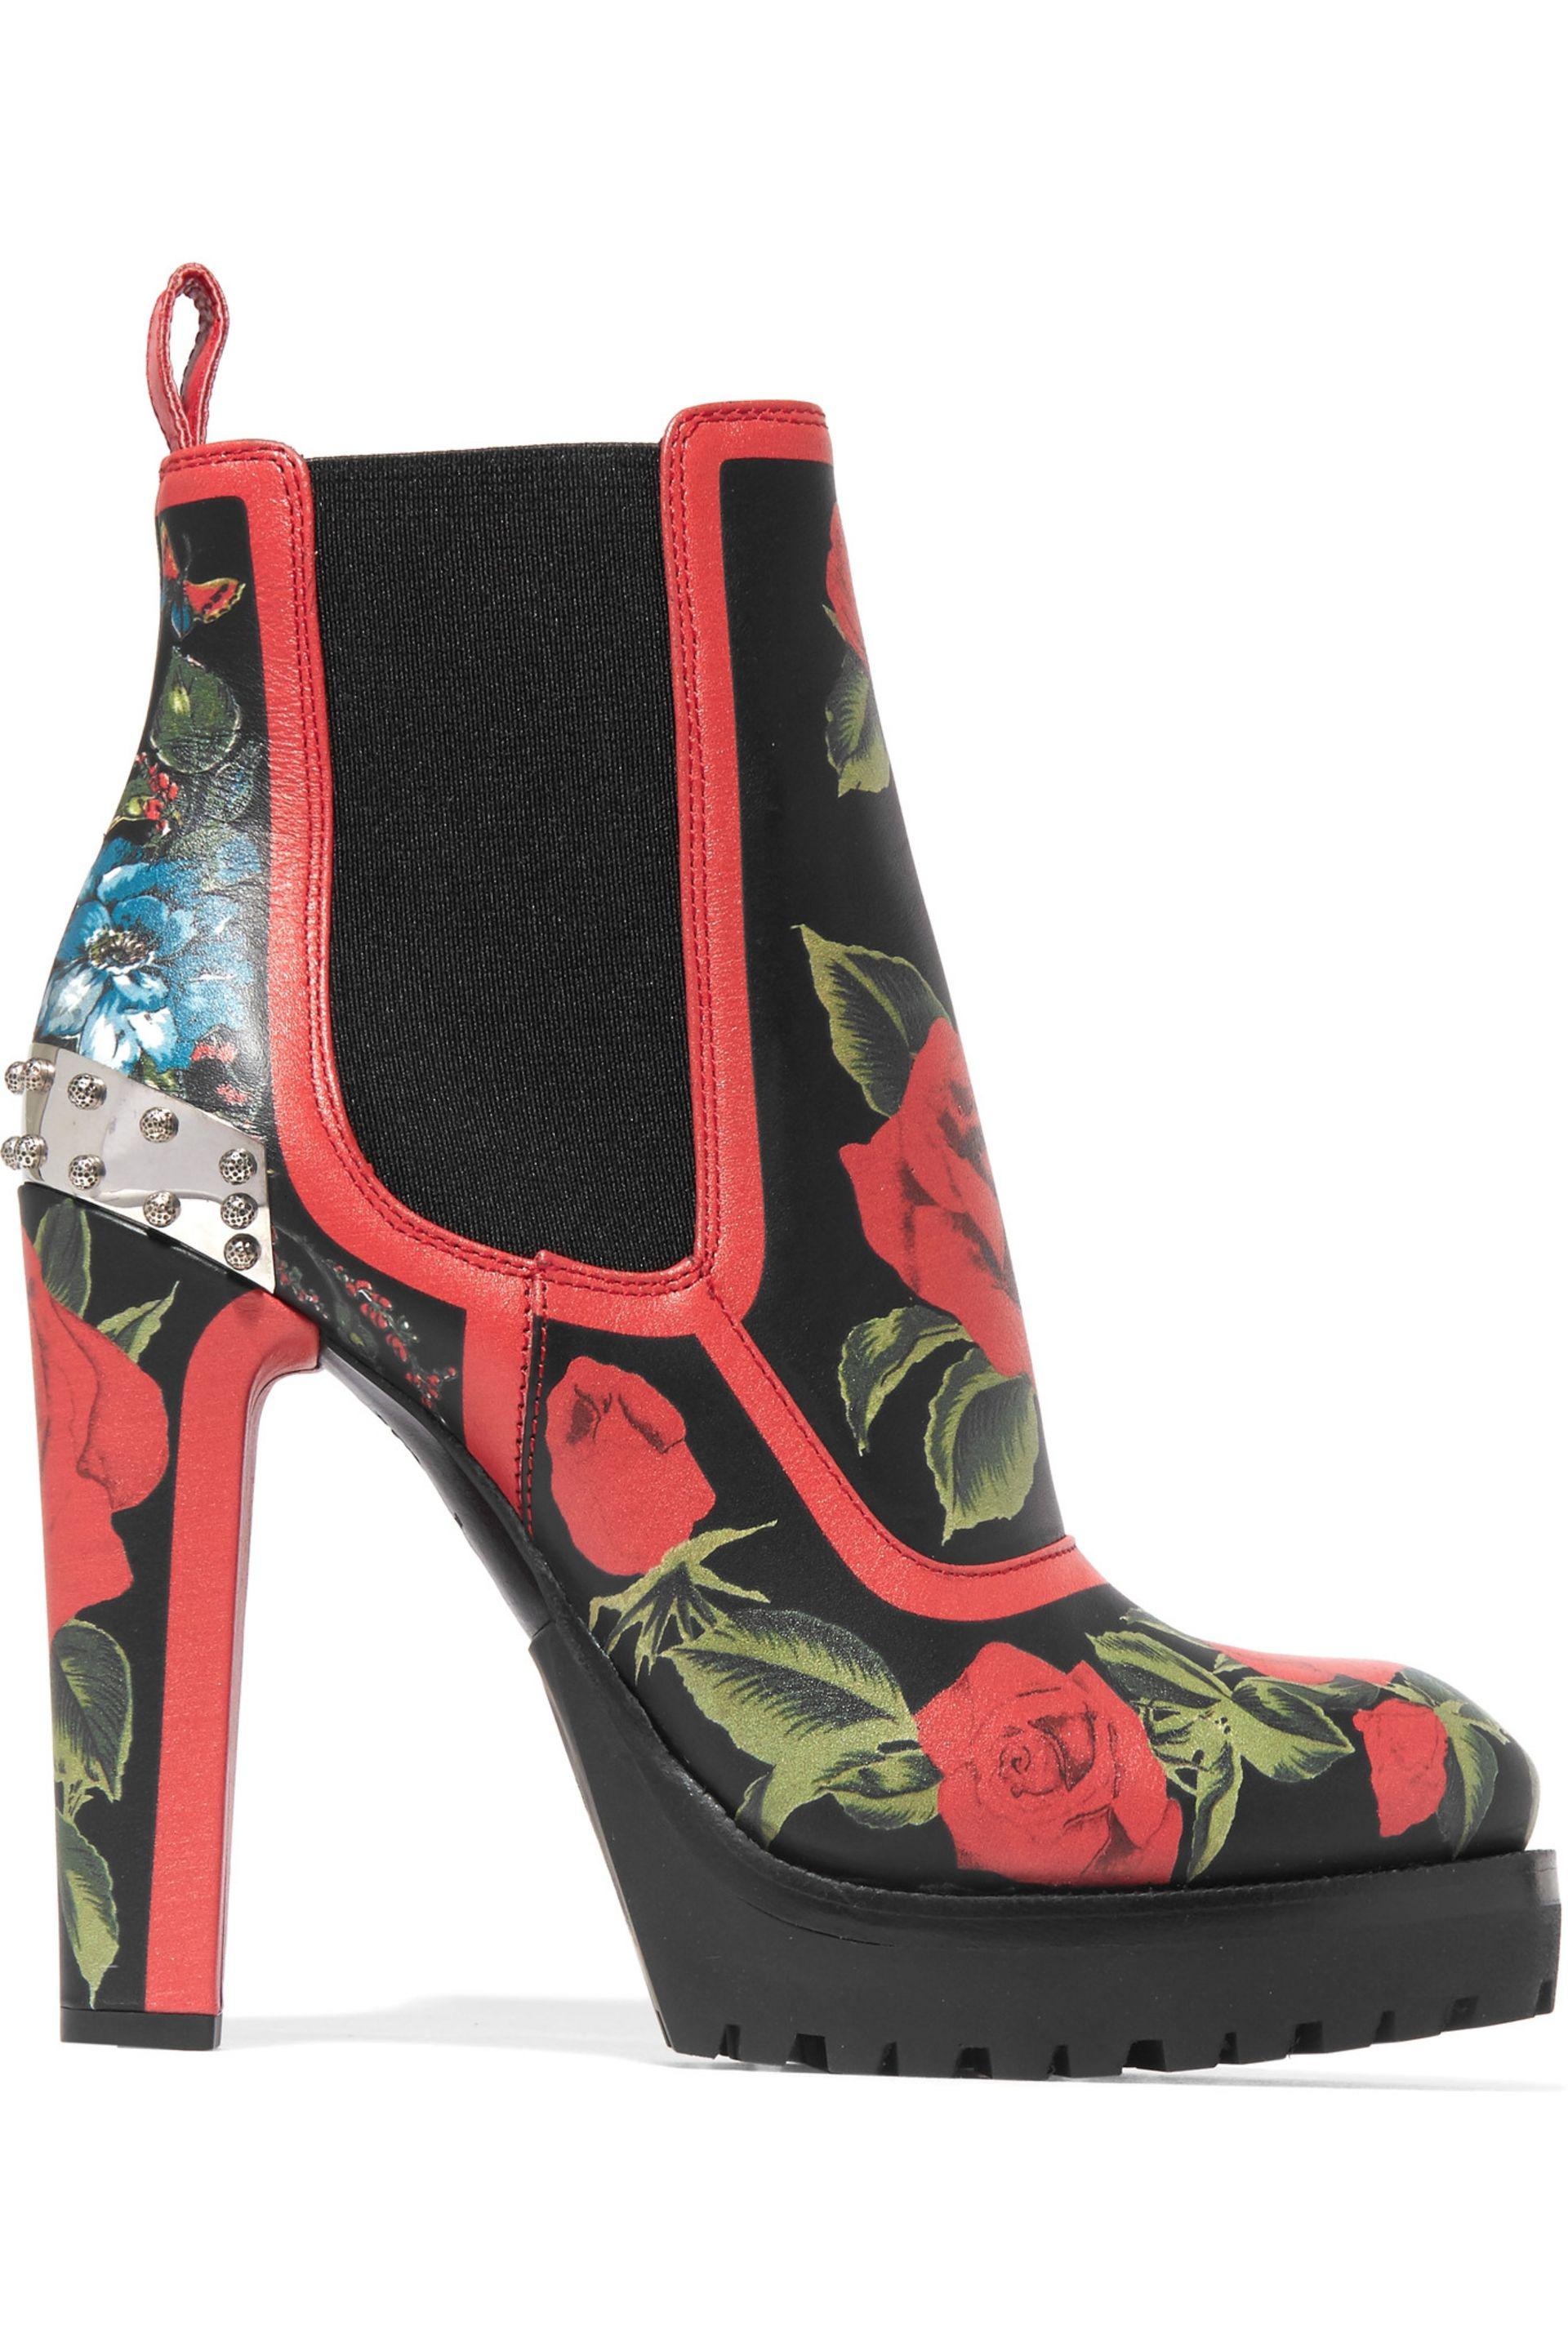 Alexander McQueen Embellished Floral-print Ankle Leather Boots in Red ...